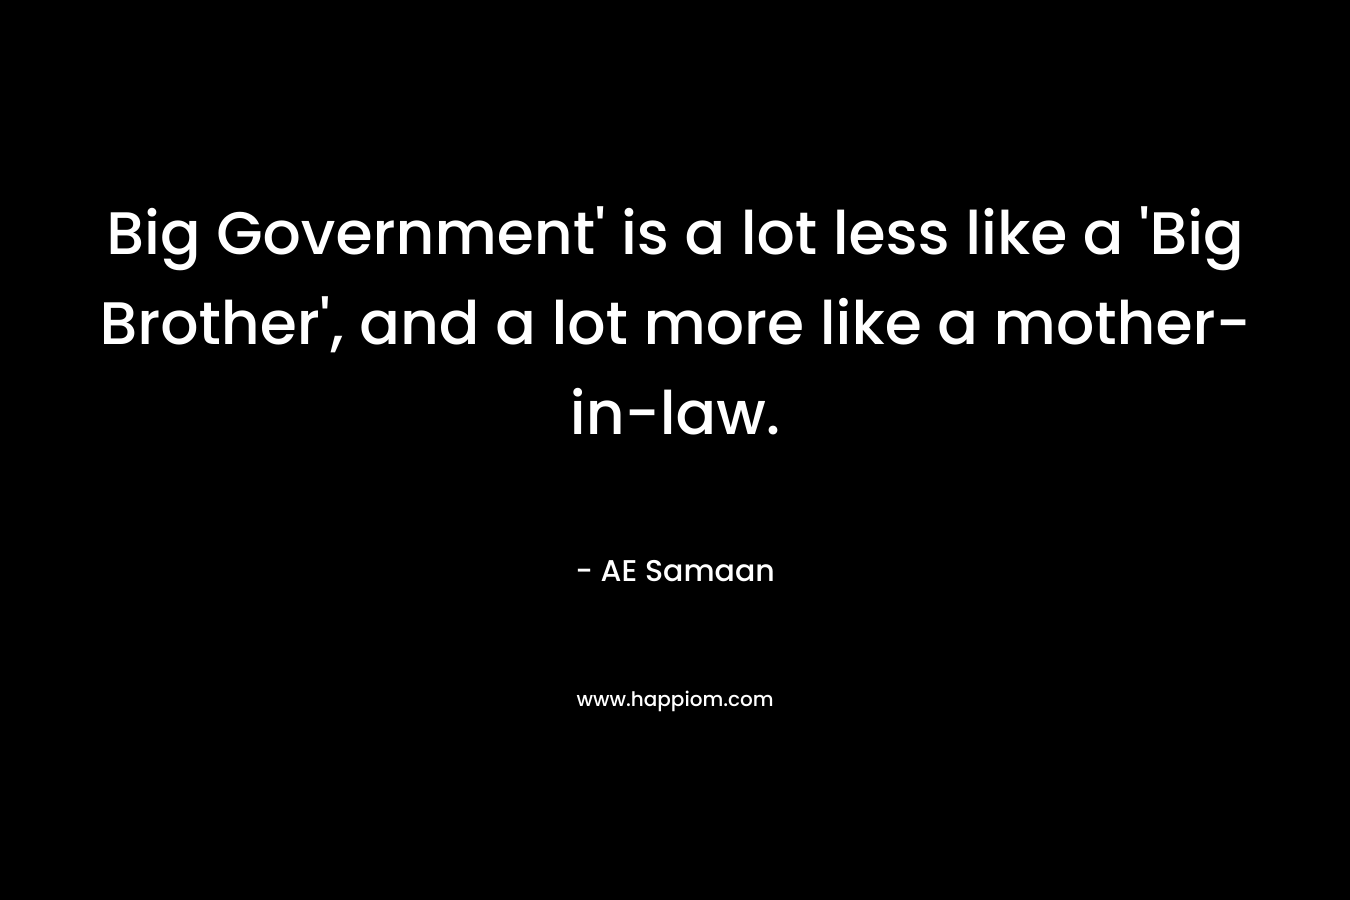 Big Government' is a lot less like a 'Big Brother', and a lot more like a mother-in-law.